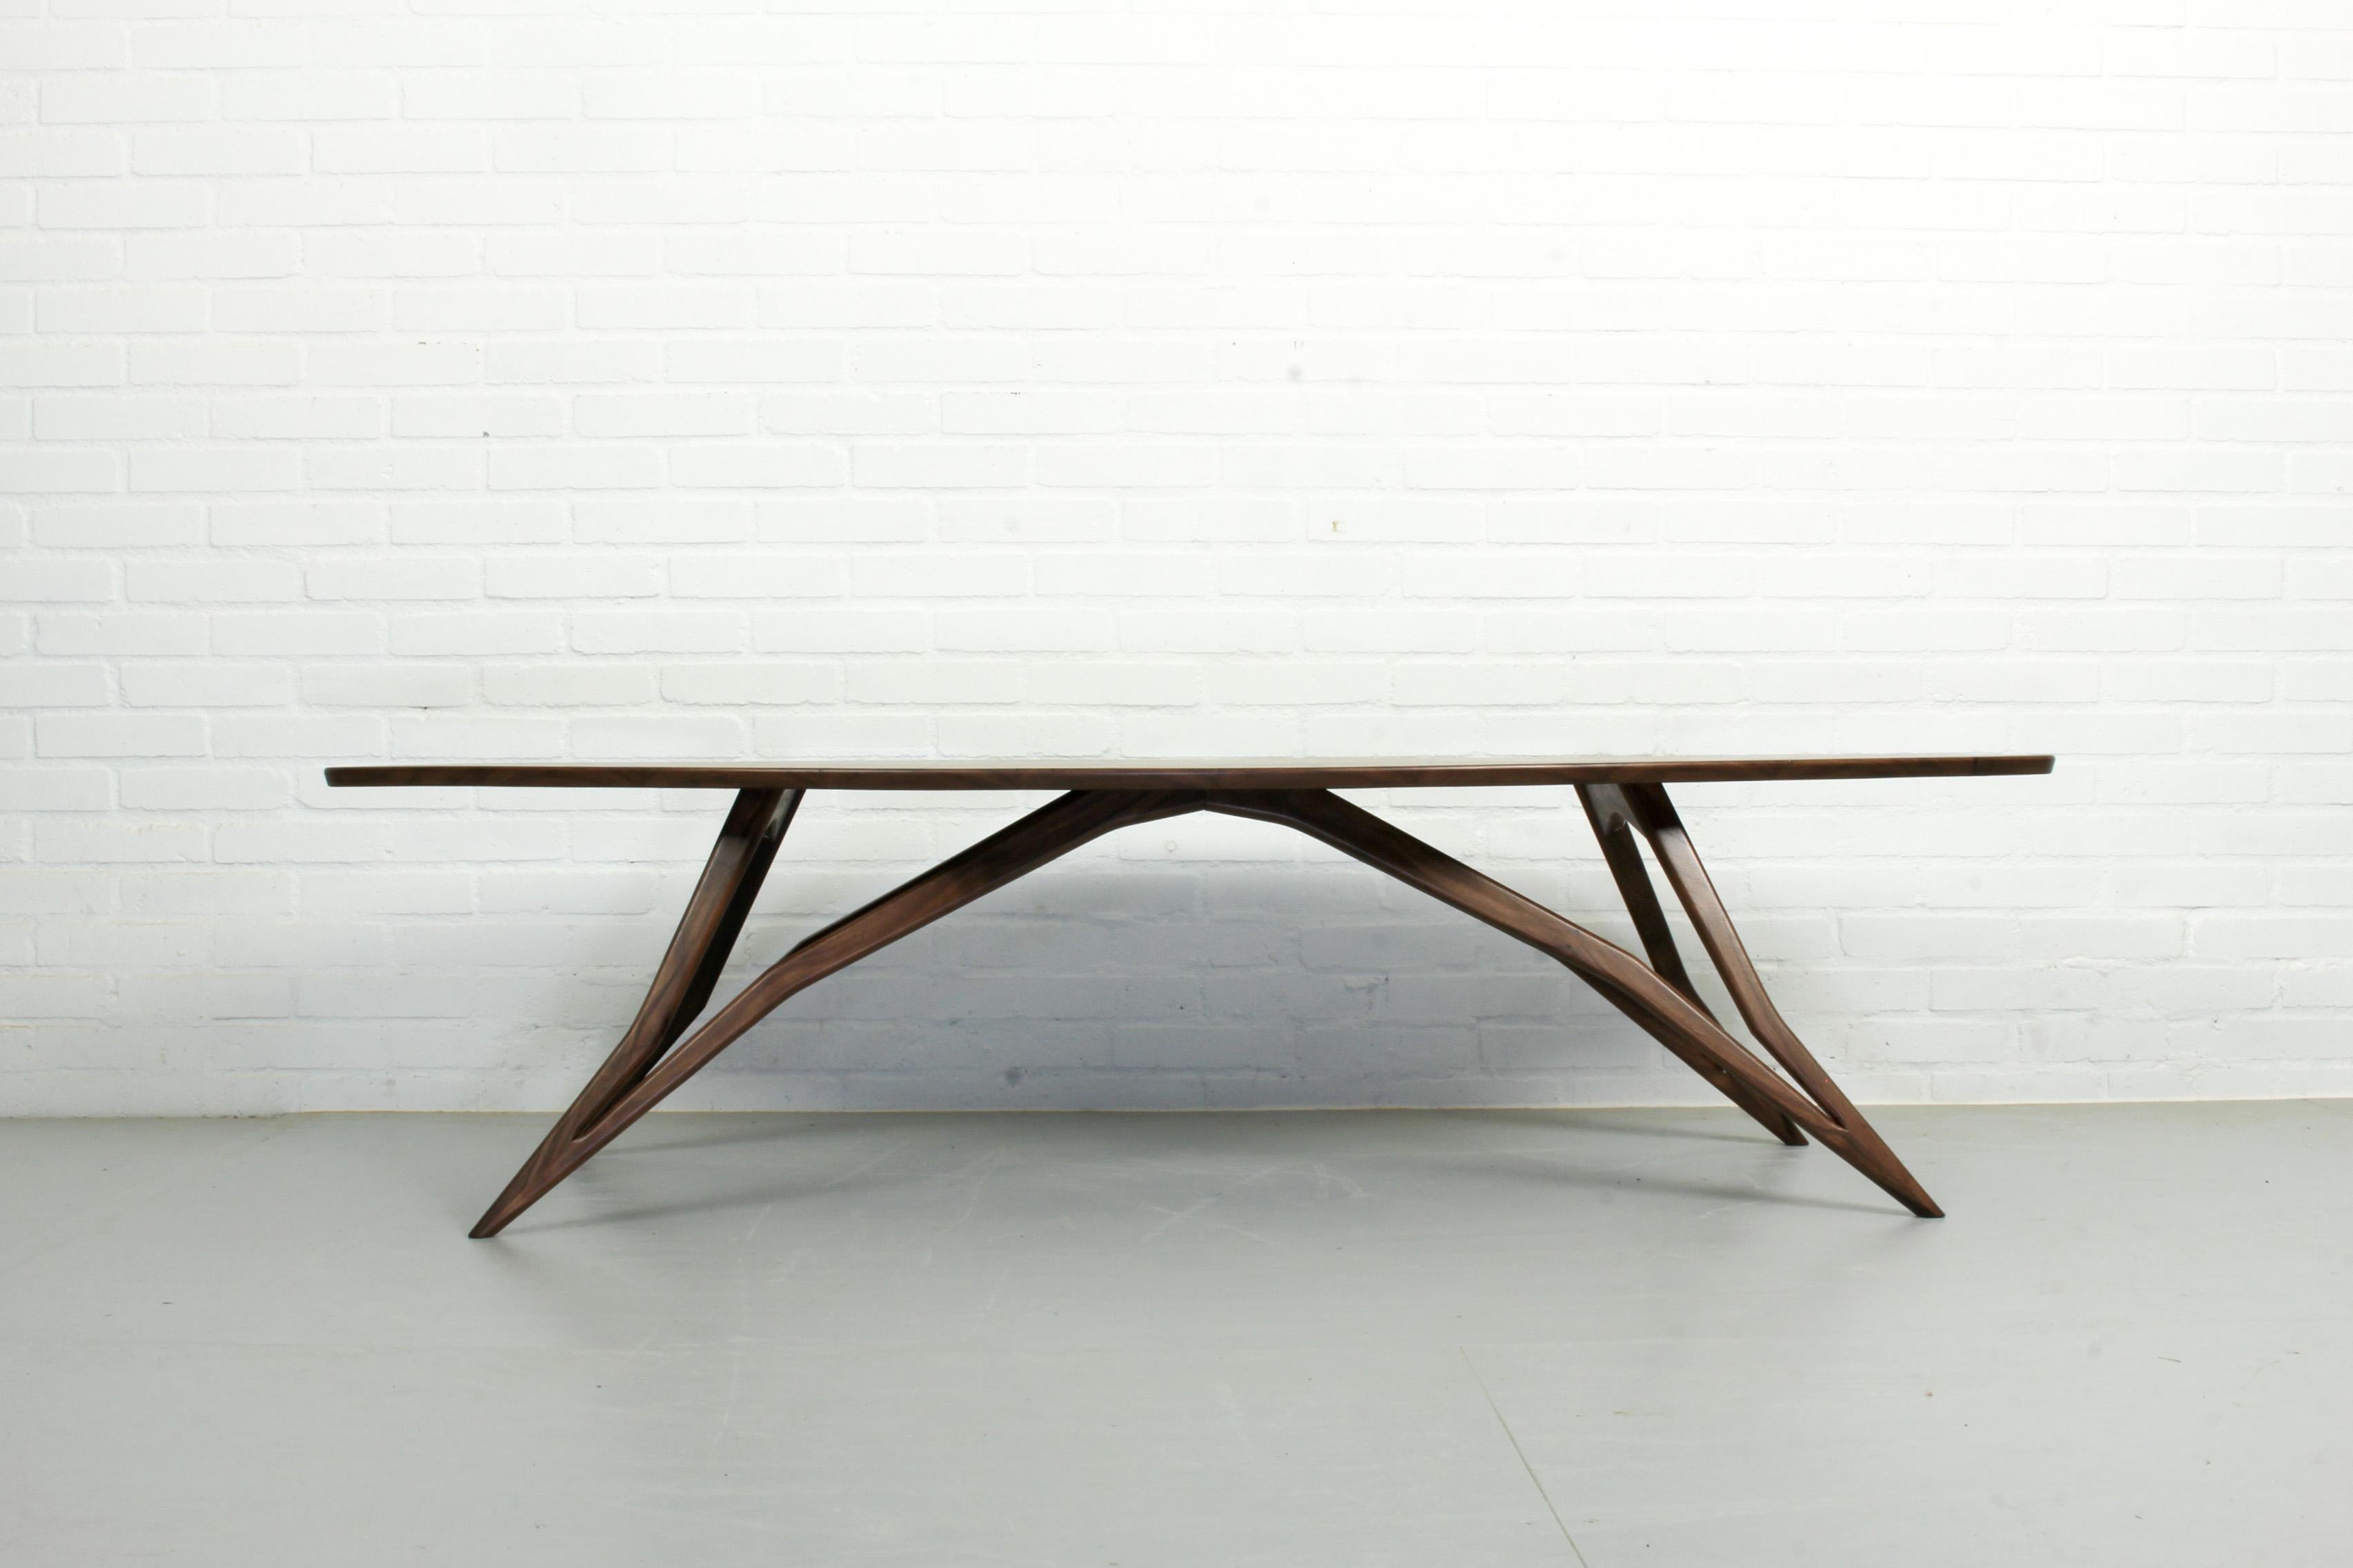 New American nut coffee table with beautiful organic shapes, shows great craftsmanship’s. One of a kind and absolutely stunning.